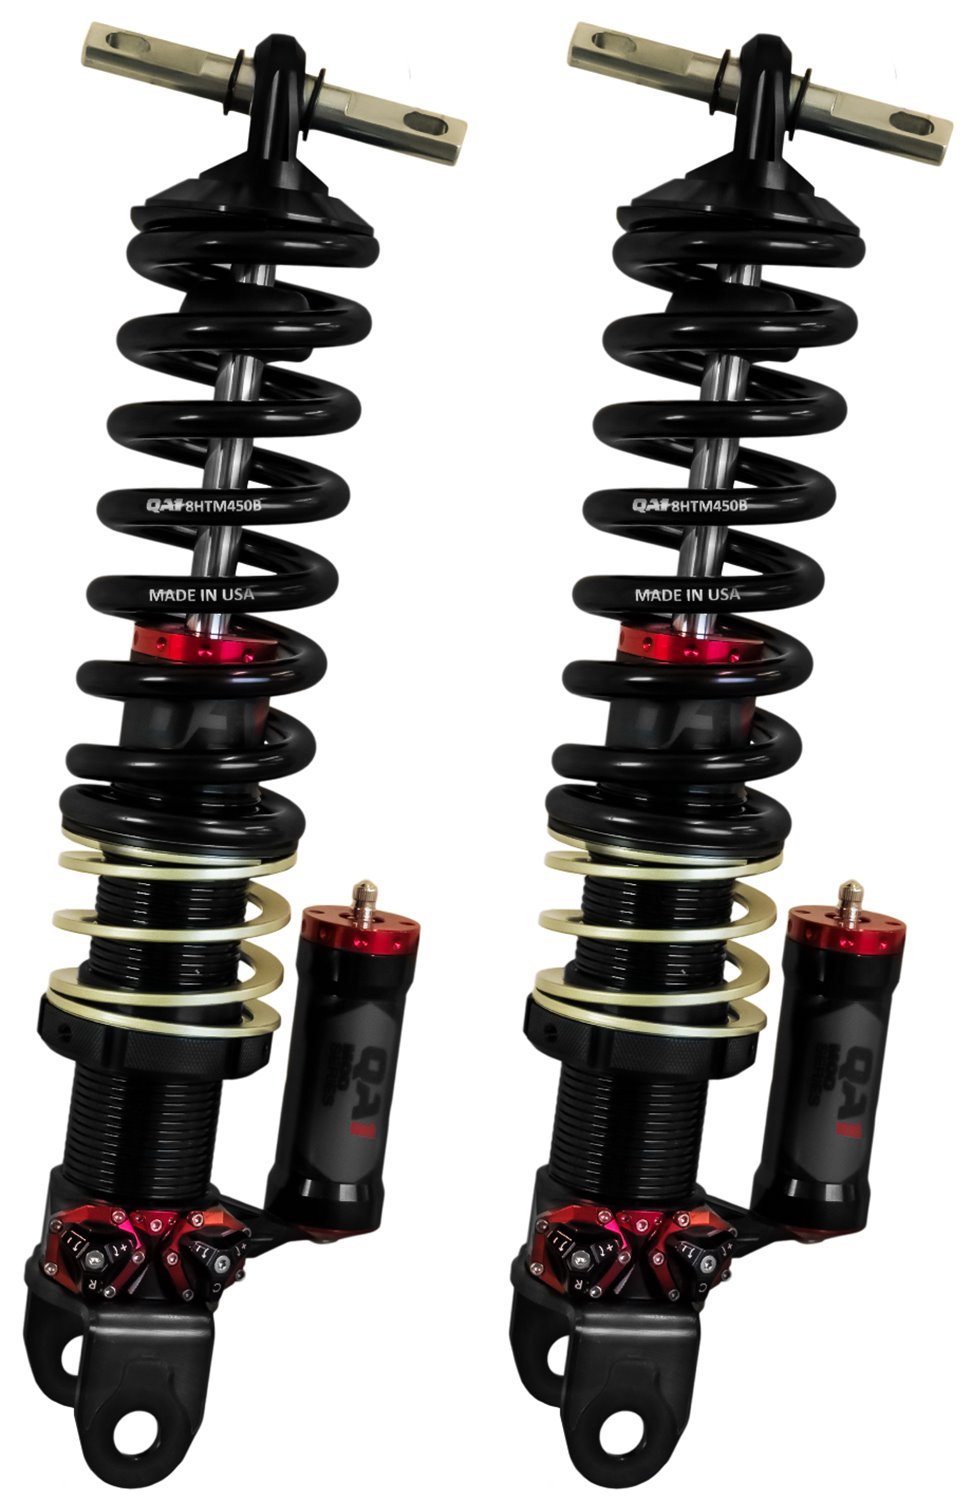 MOD-Series Rear Coil-Over System 1997-2013 Chevy Corvette C5/C6, 4-Way Adjustable [Spring Rate: 700 lbs./in.]